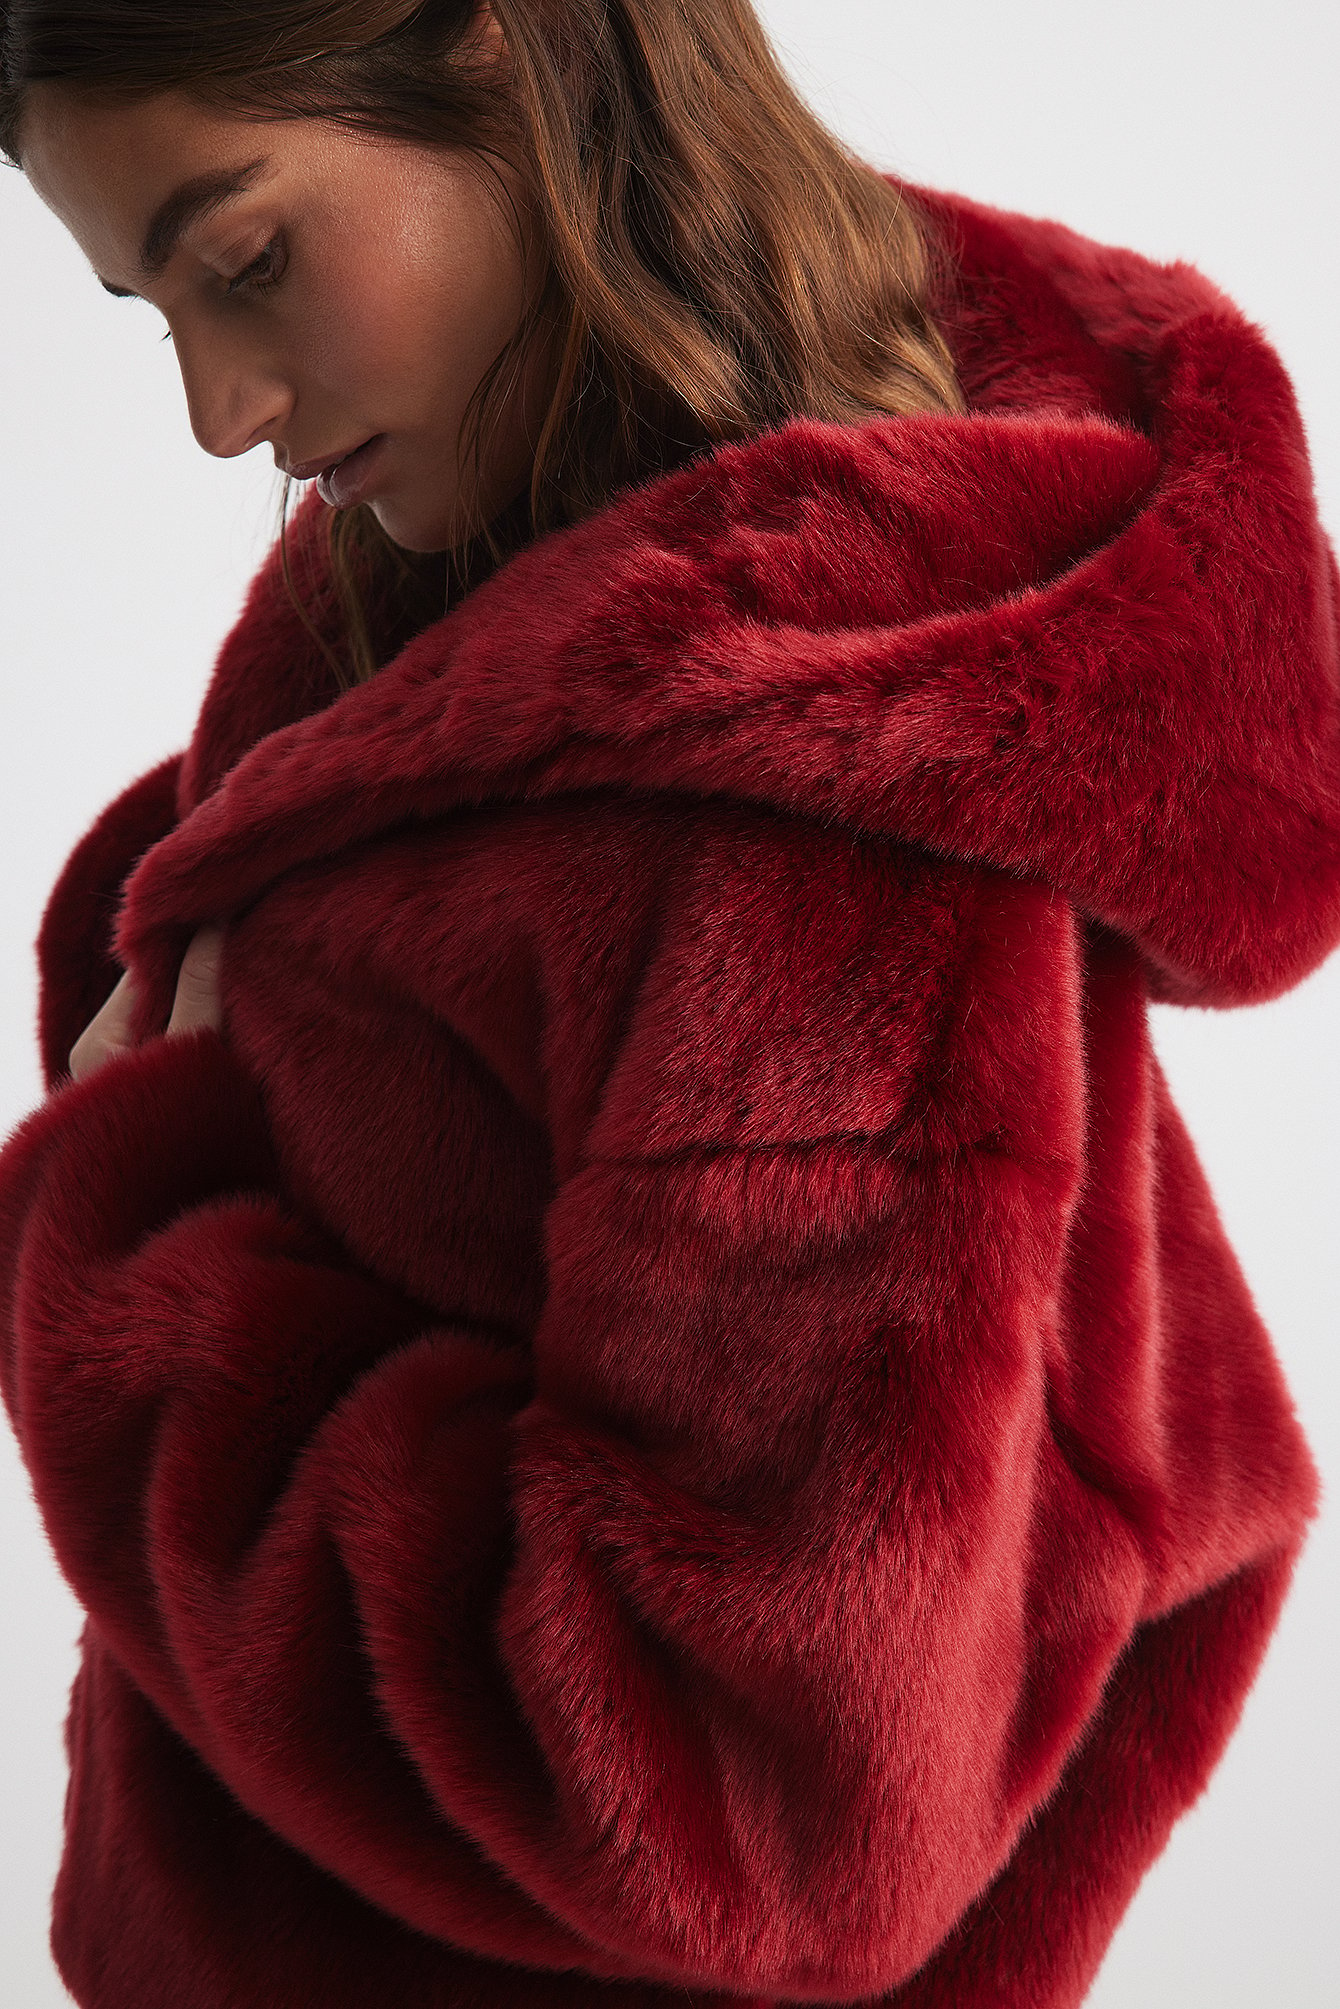 Faux Fur Hooded Jacket Red | NA-KD